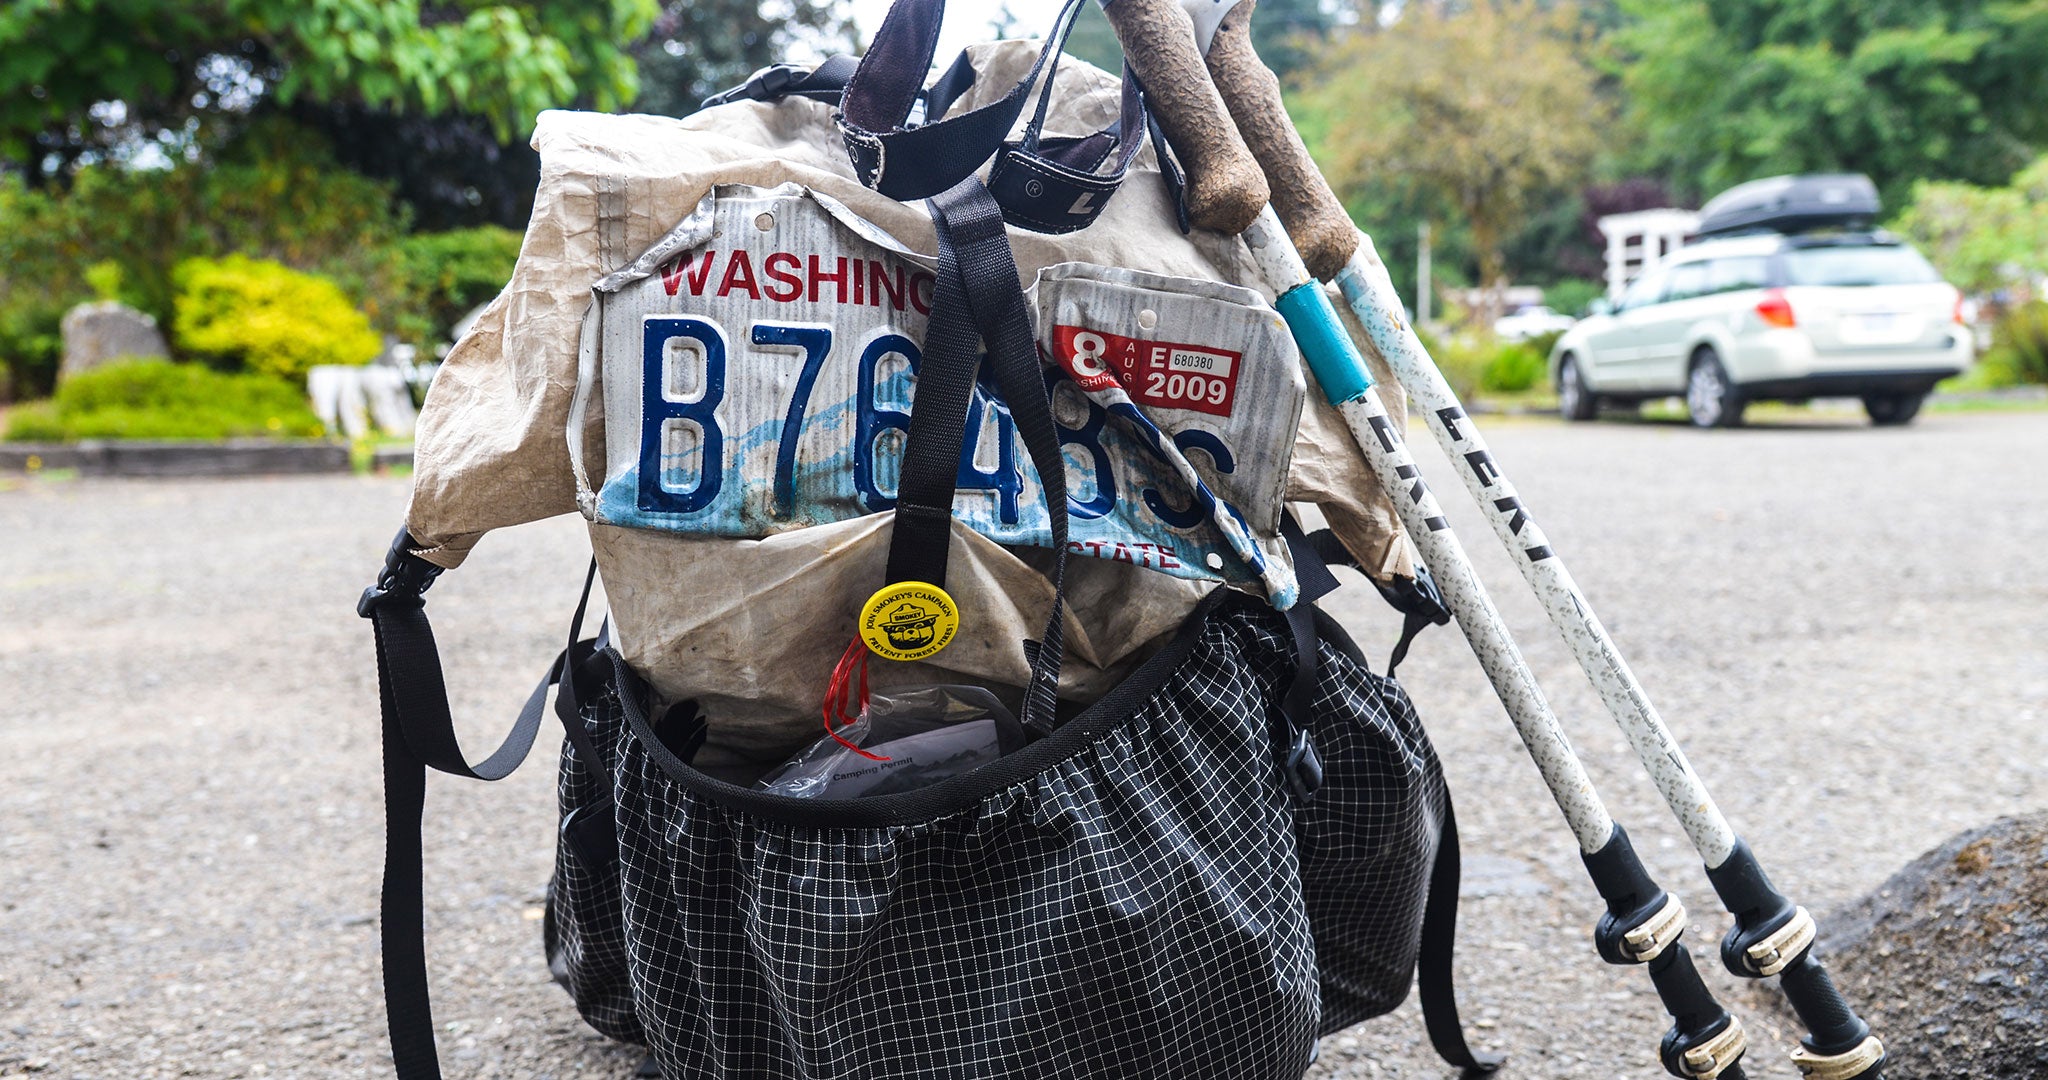 Ultralight backpack with damaged Washington license plate attached